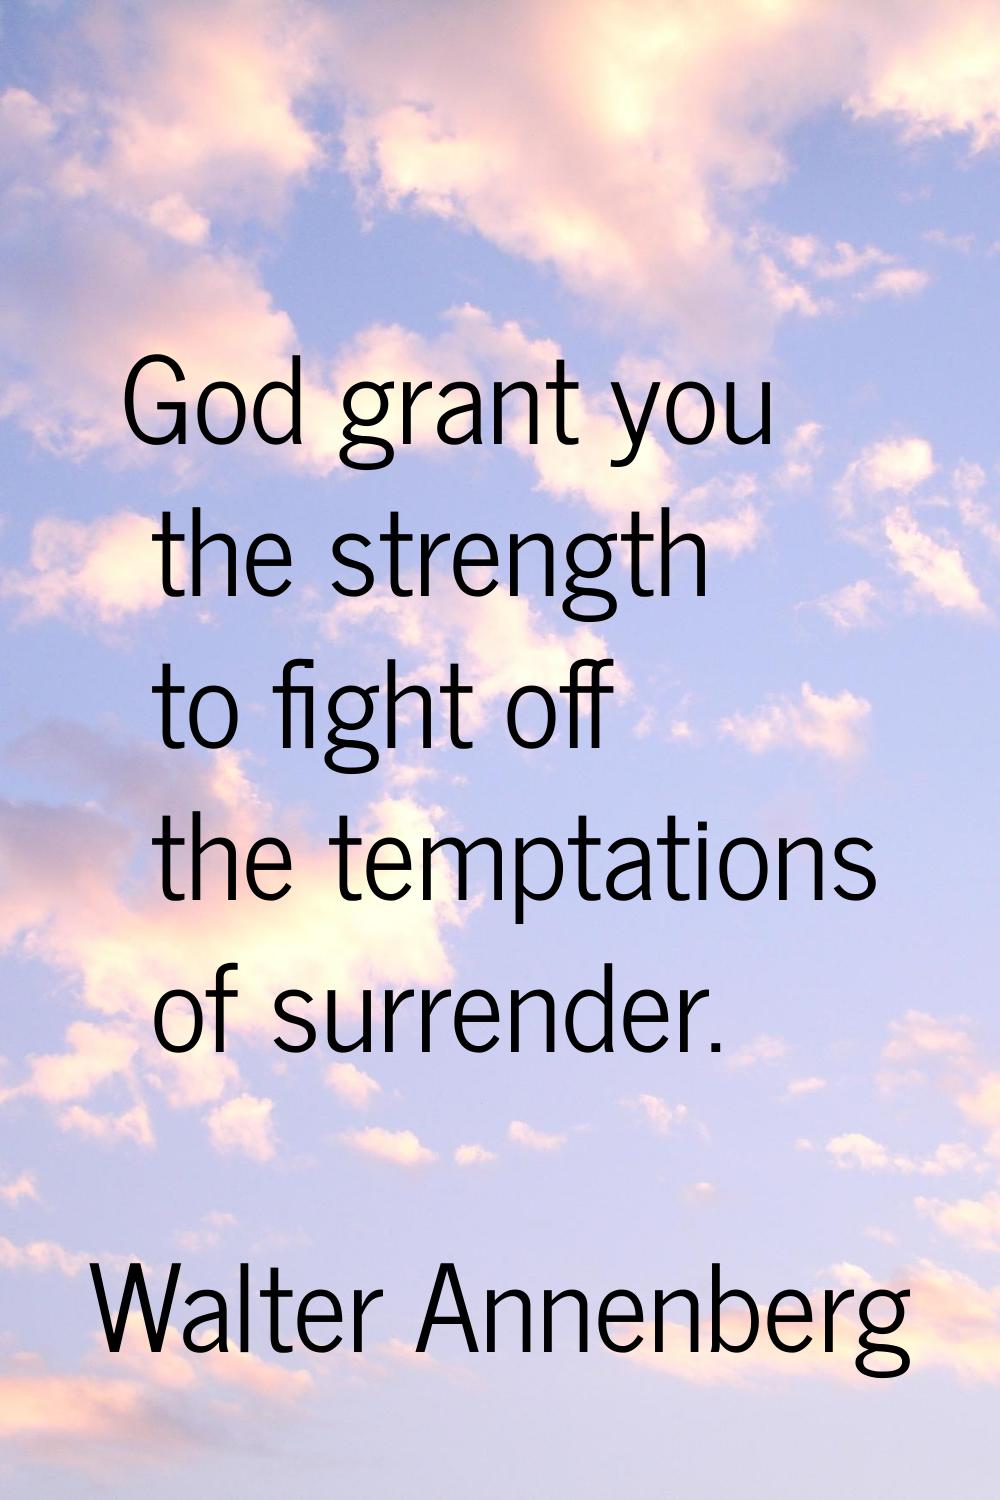 God grant you the strength to fight off the temptations of surrender.